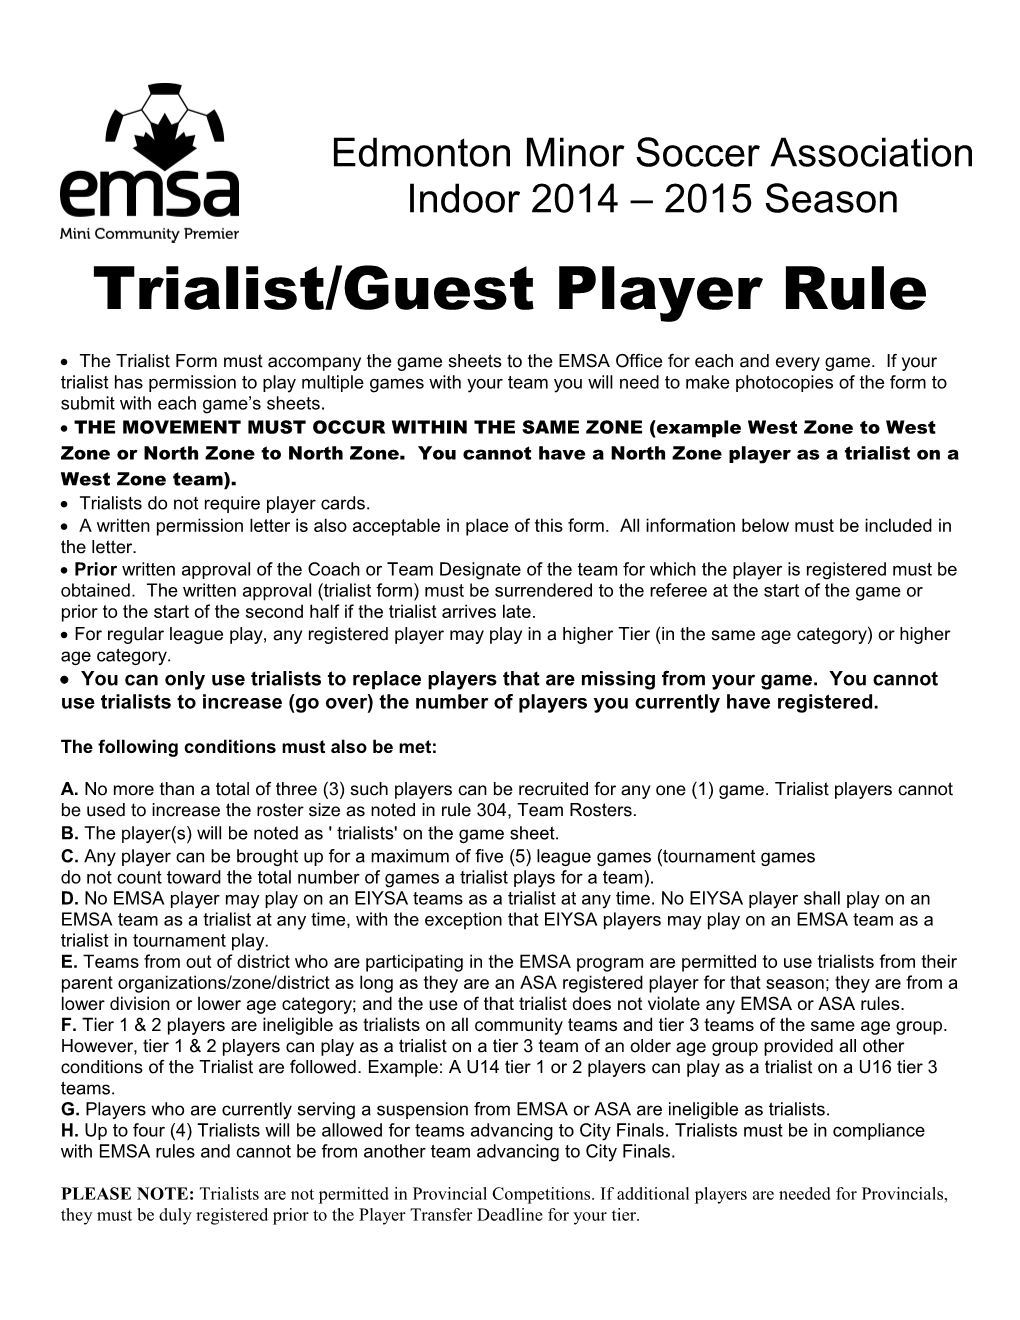 Trialist/Guest Player Rule